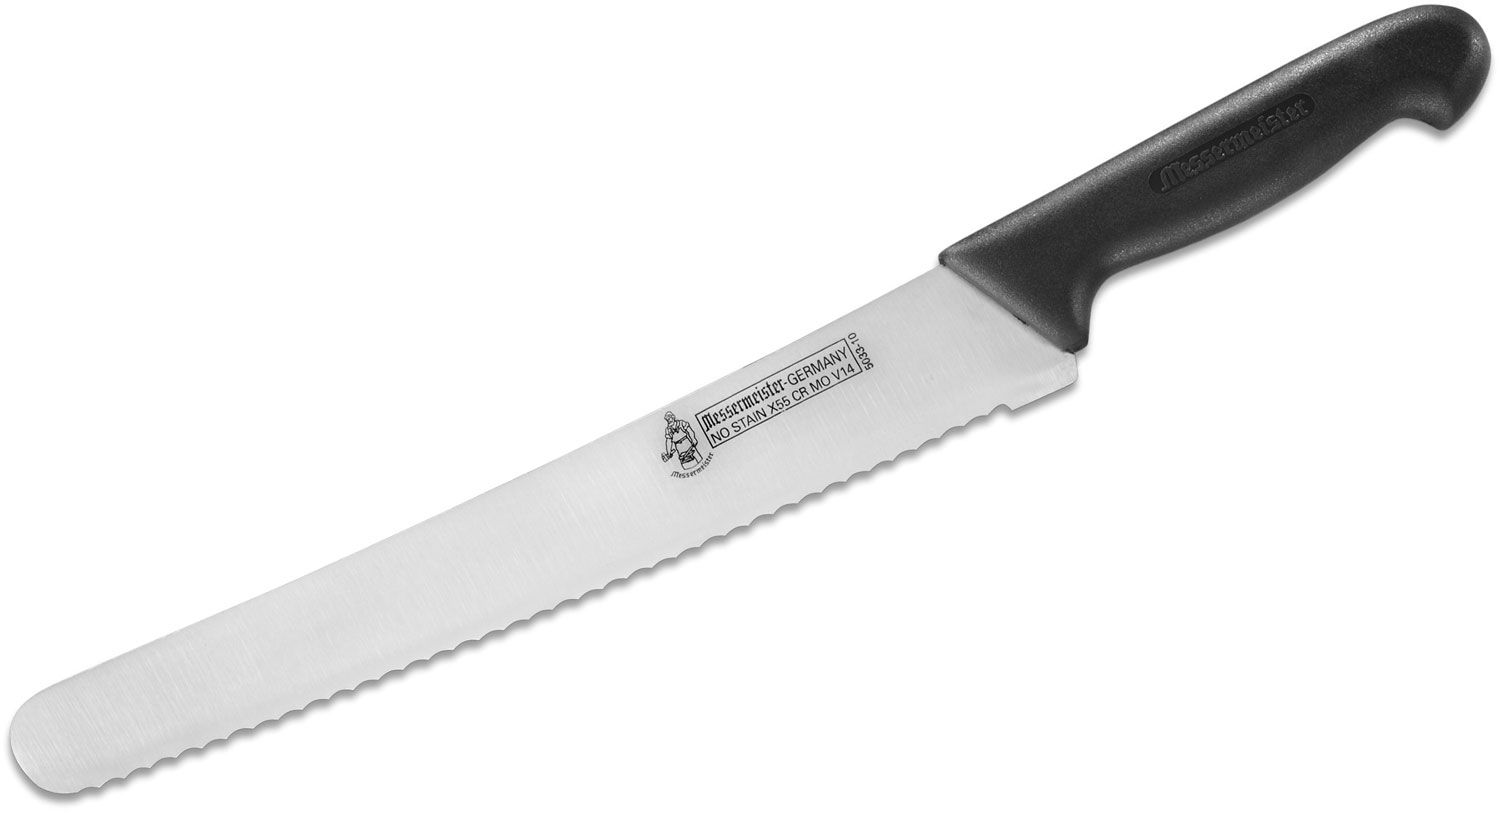 BREAD KNIFE - ROUNDED TIP